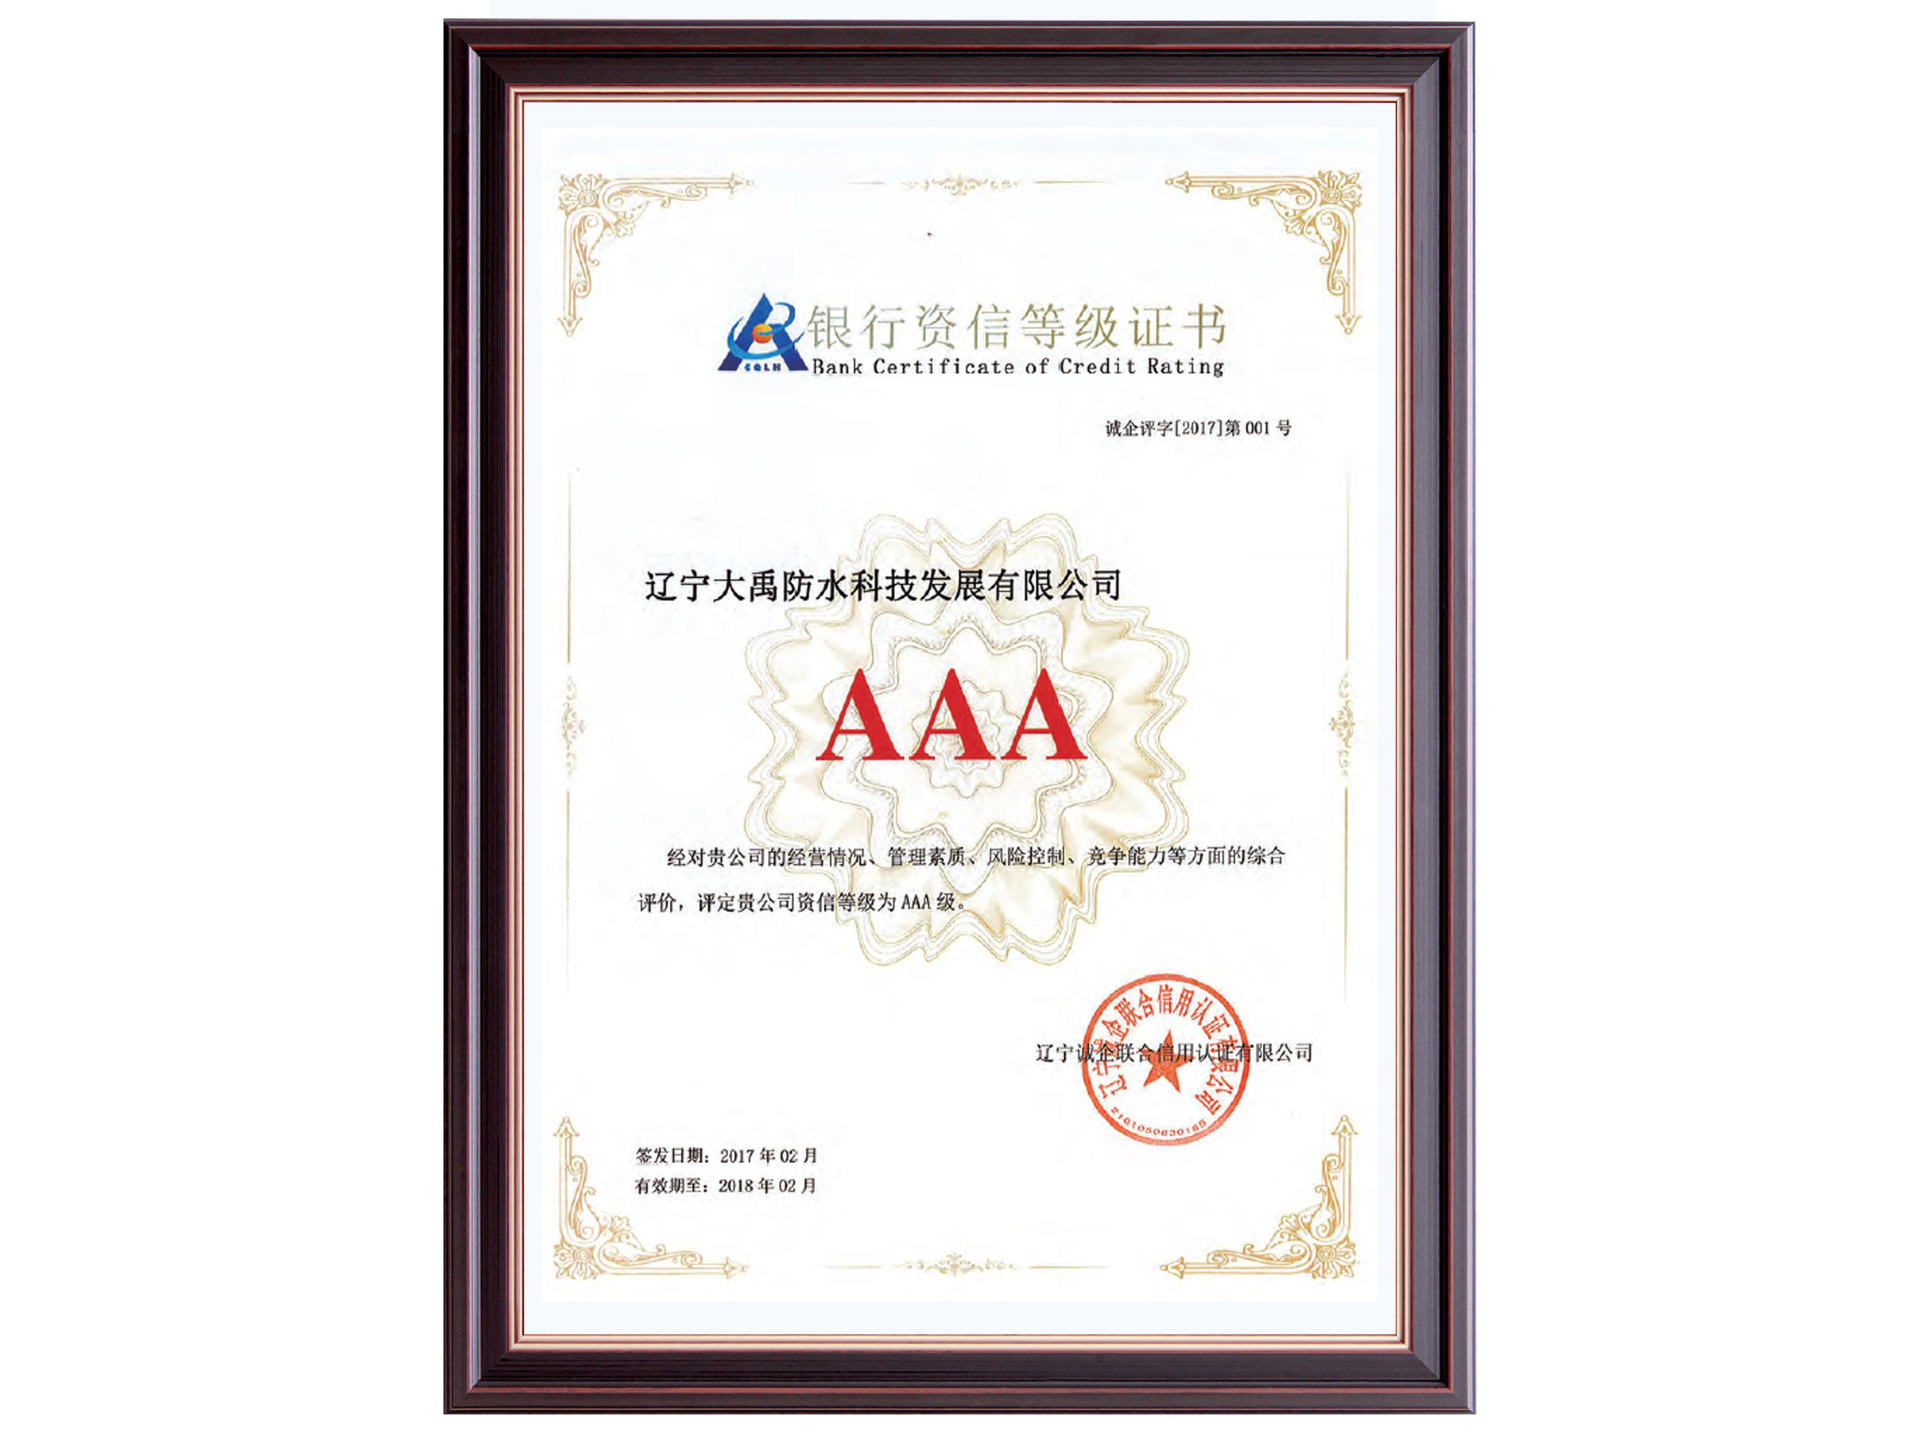 AAA certificate of bank credit rating